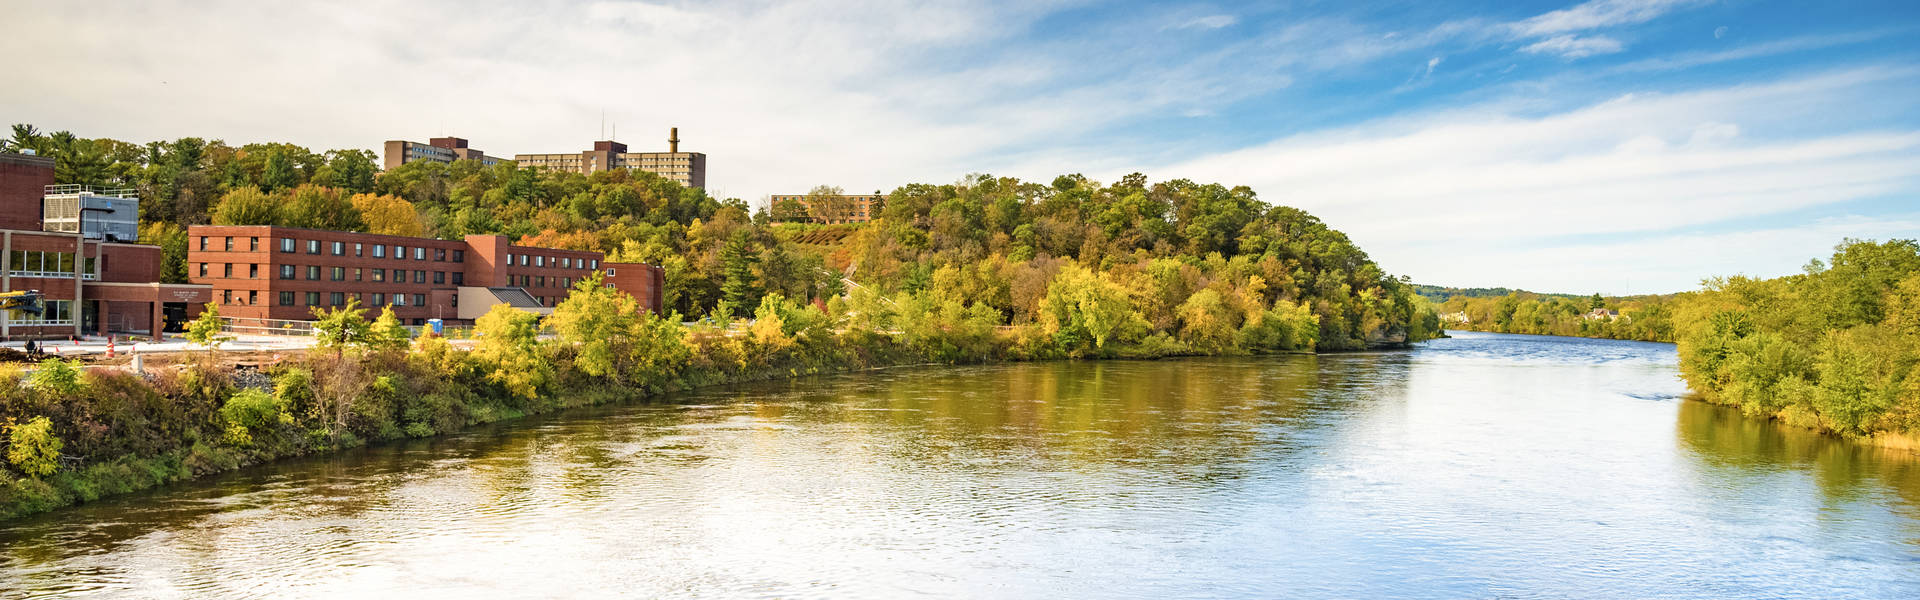 UW-Eau Claire campus and the river in fall colors